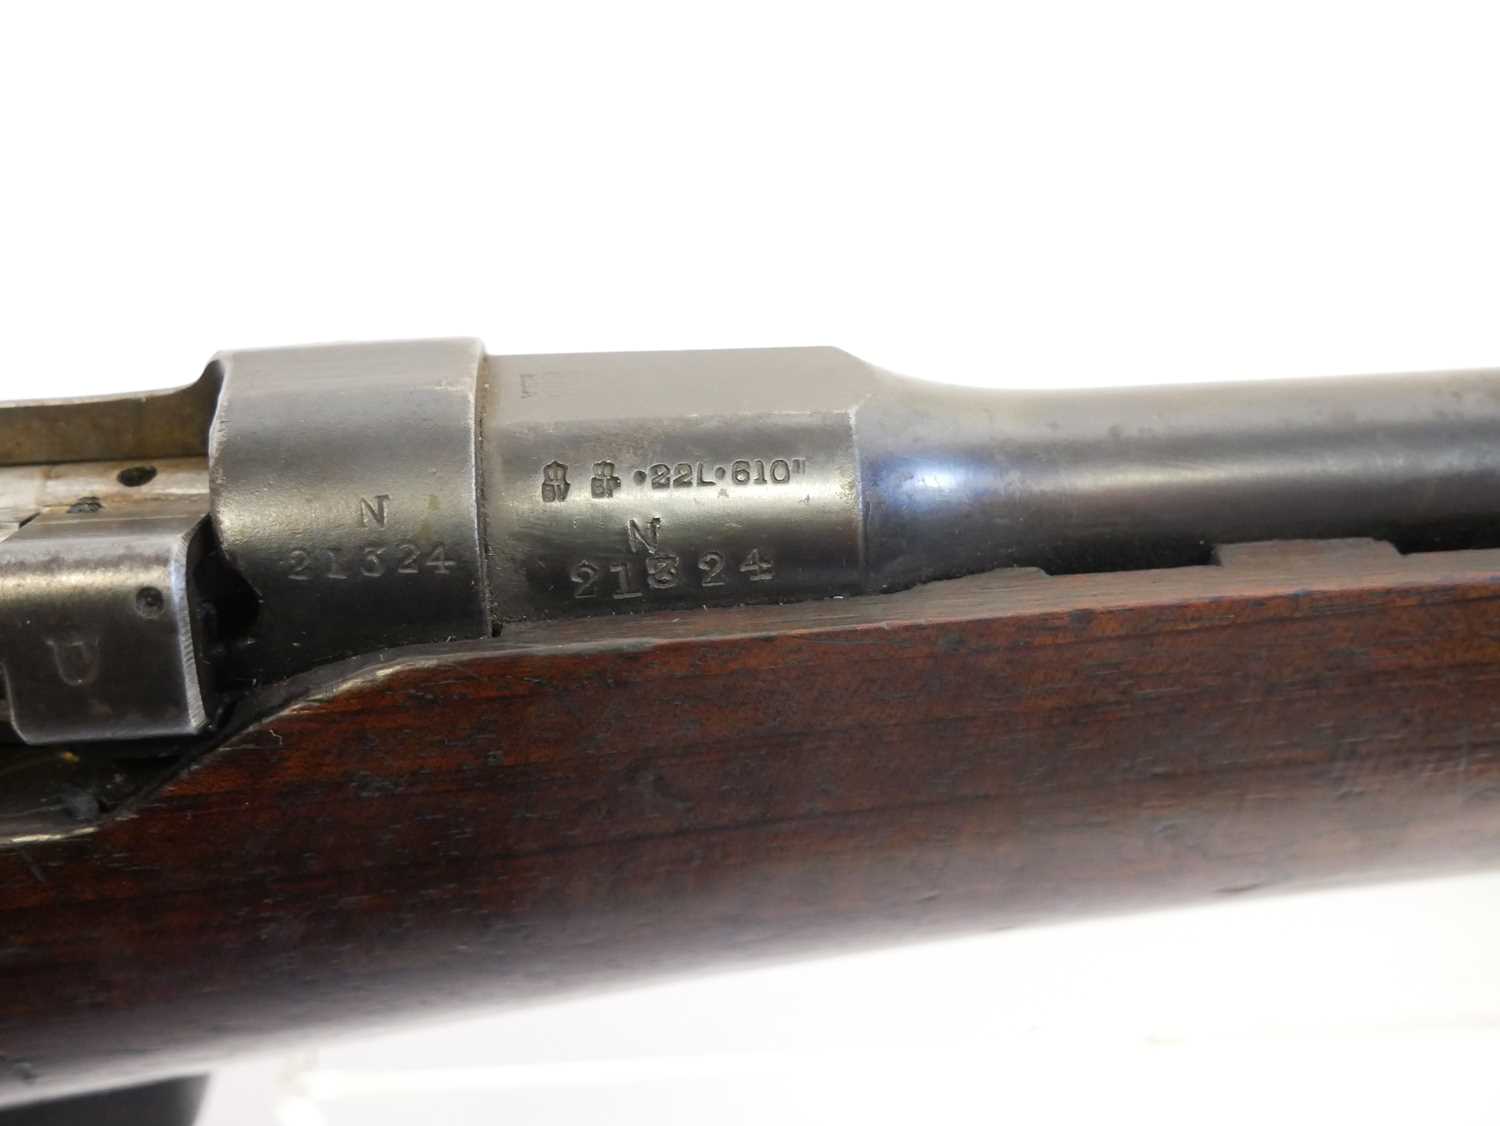 London Small Arms Lee Enfield .22 bolt action rifle, serial number 21324, 25inch barrel fitted - Image 9 of 14